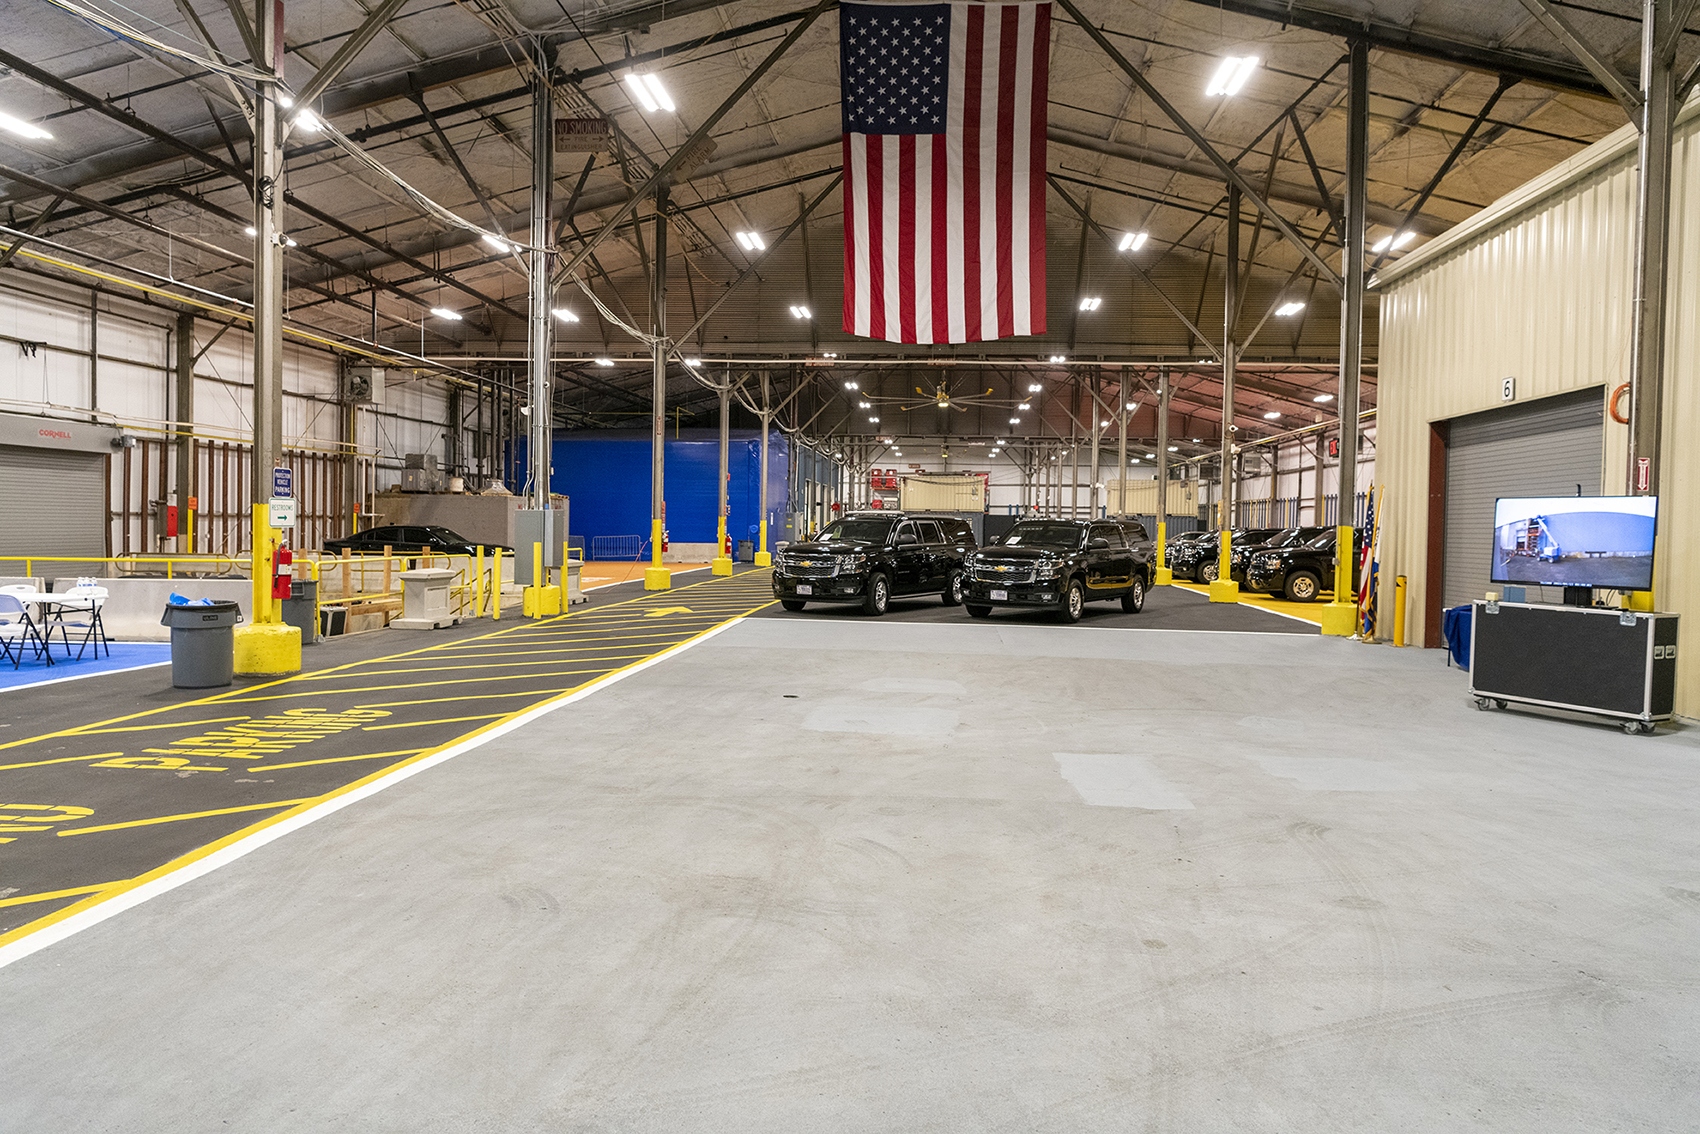 Two protective vehicles parked under an American flag in a commercial building.